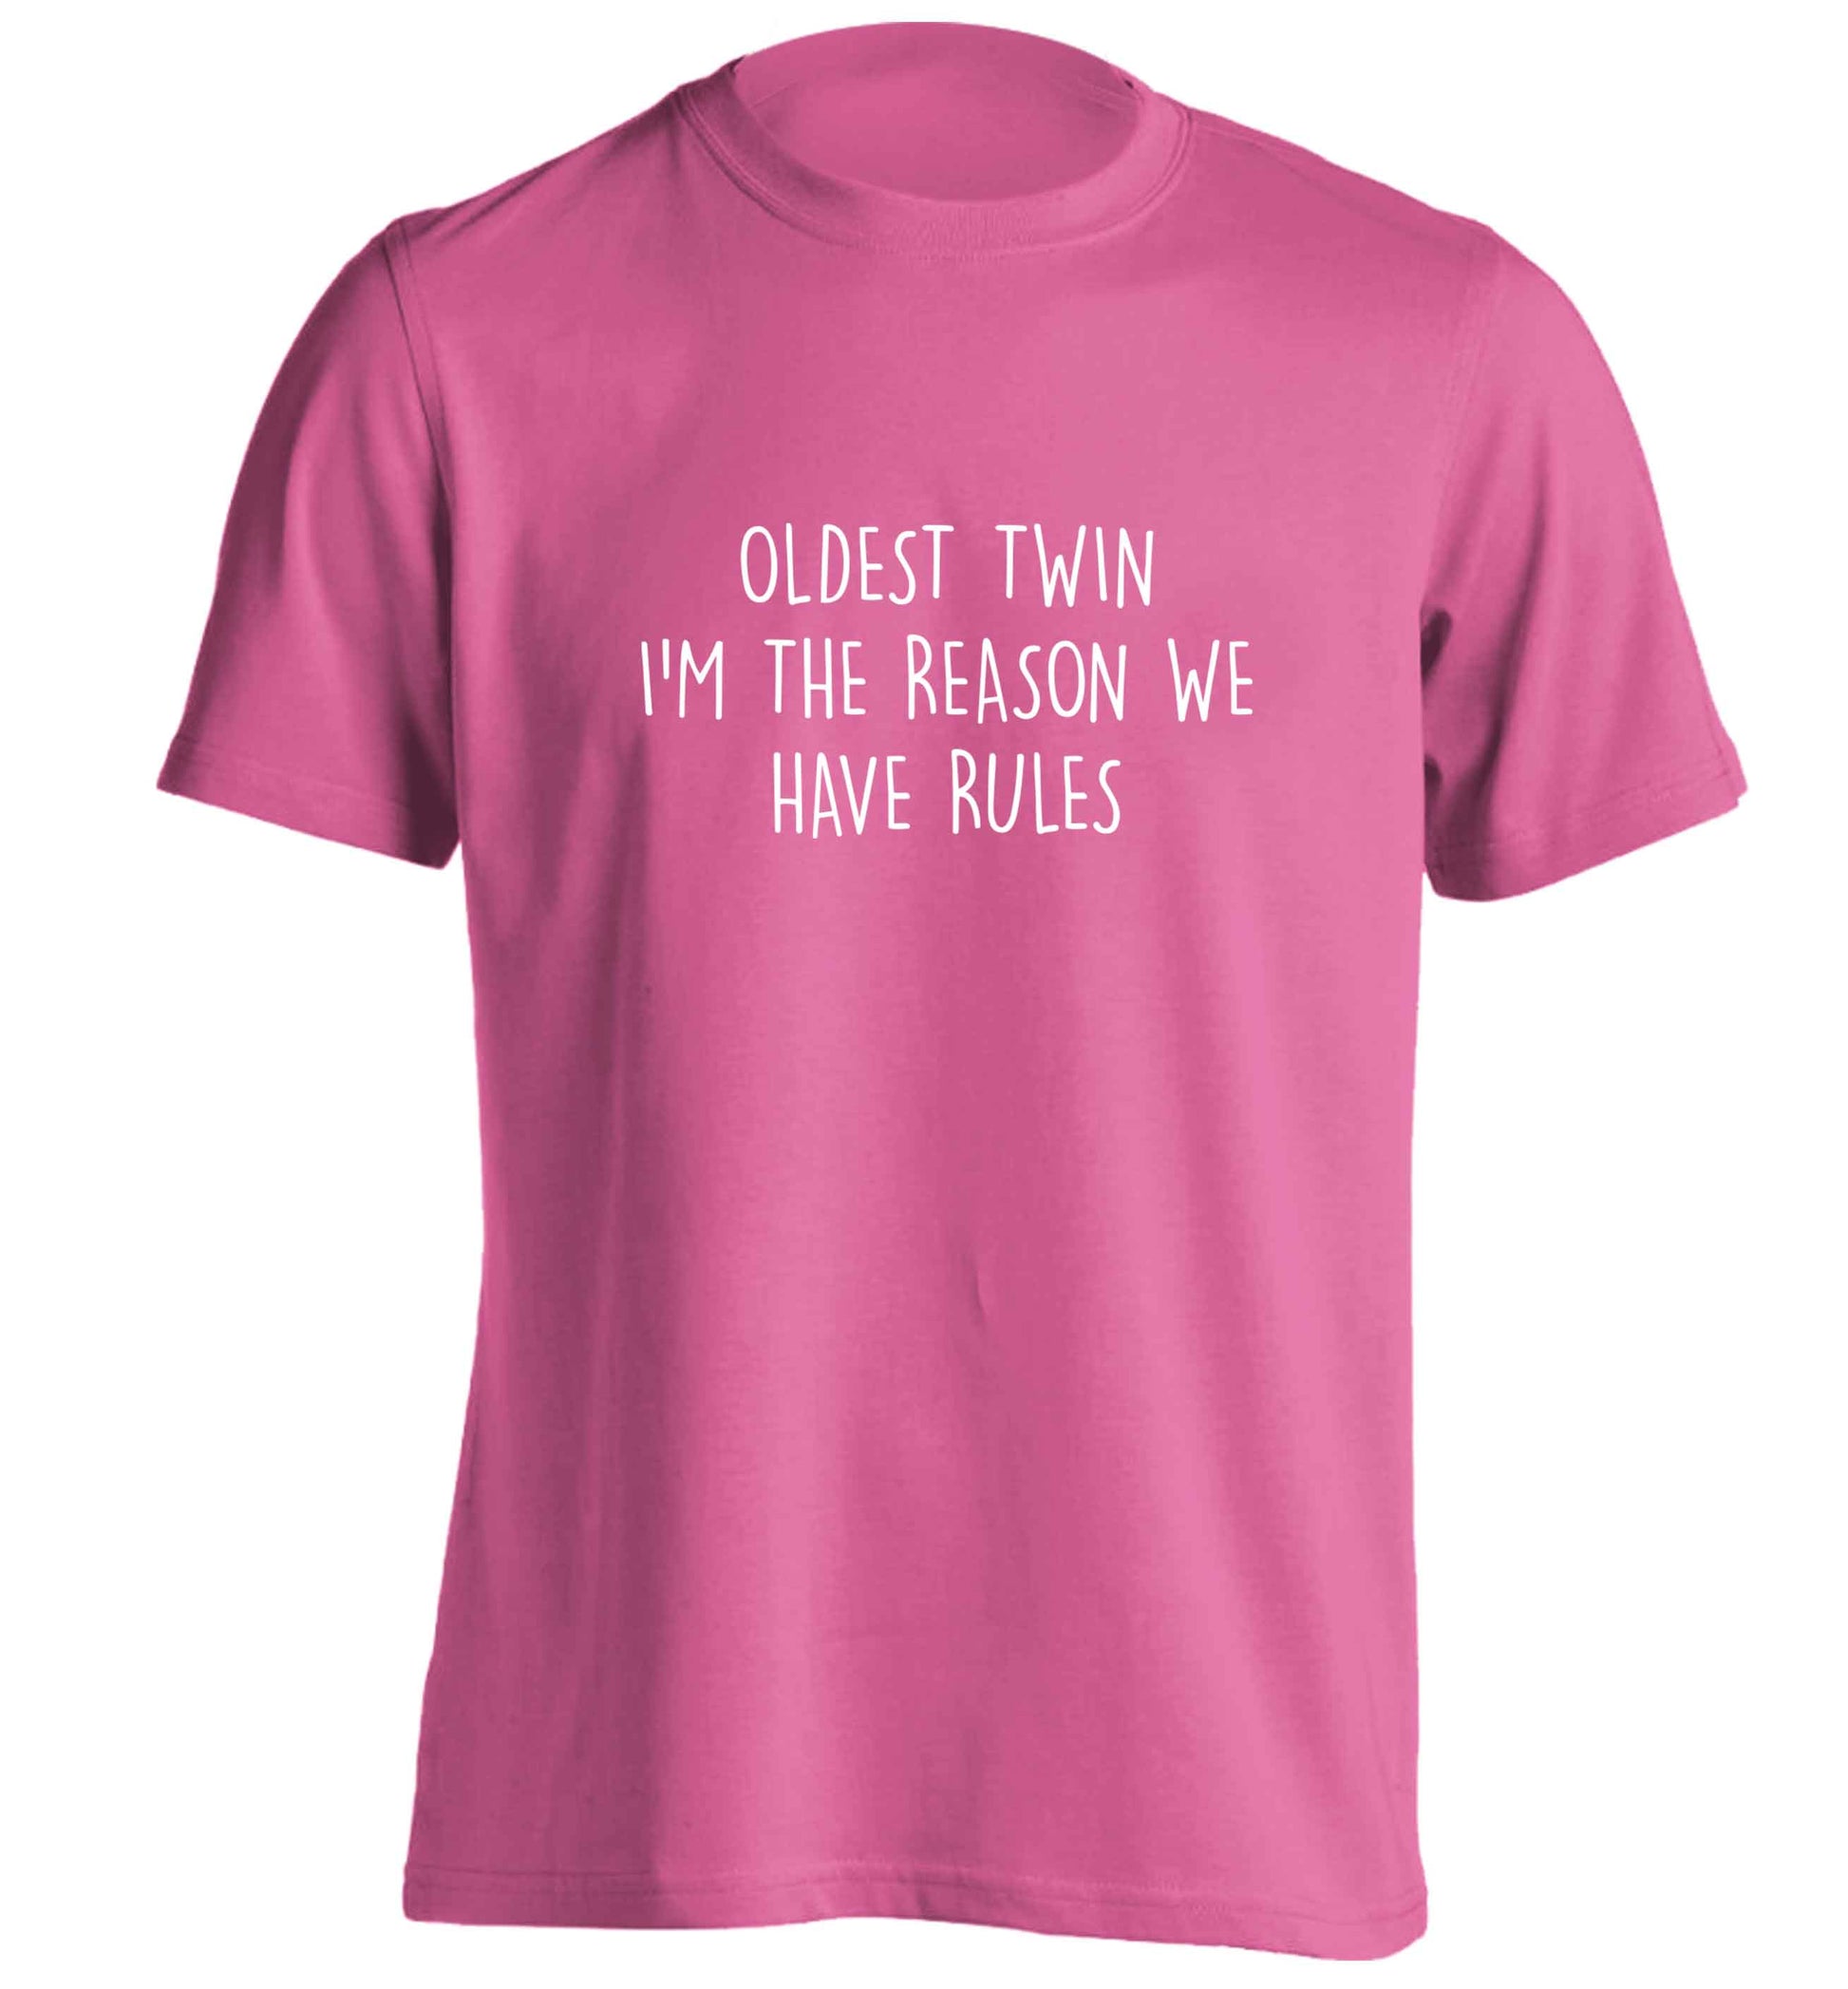 Oldest twin I'm the reason we have rules adults unisex pink Tshirt 2XL